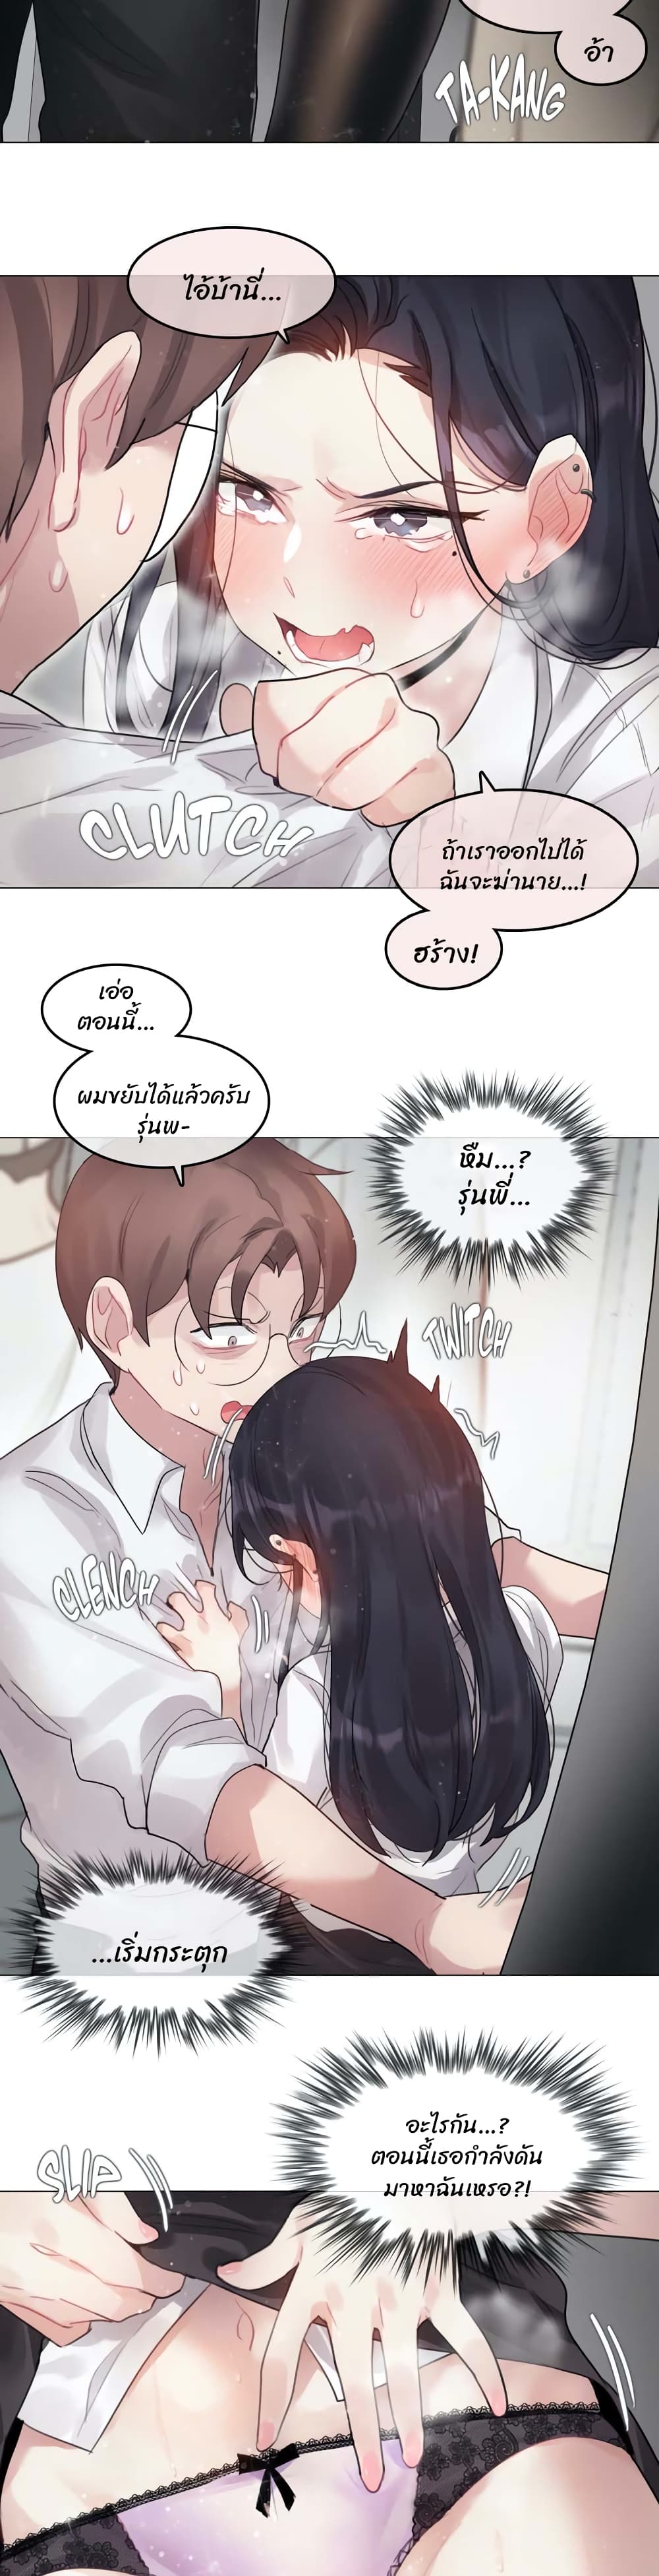 A Pervert's Daily Life 98-98